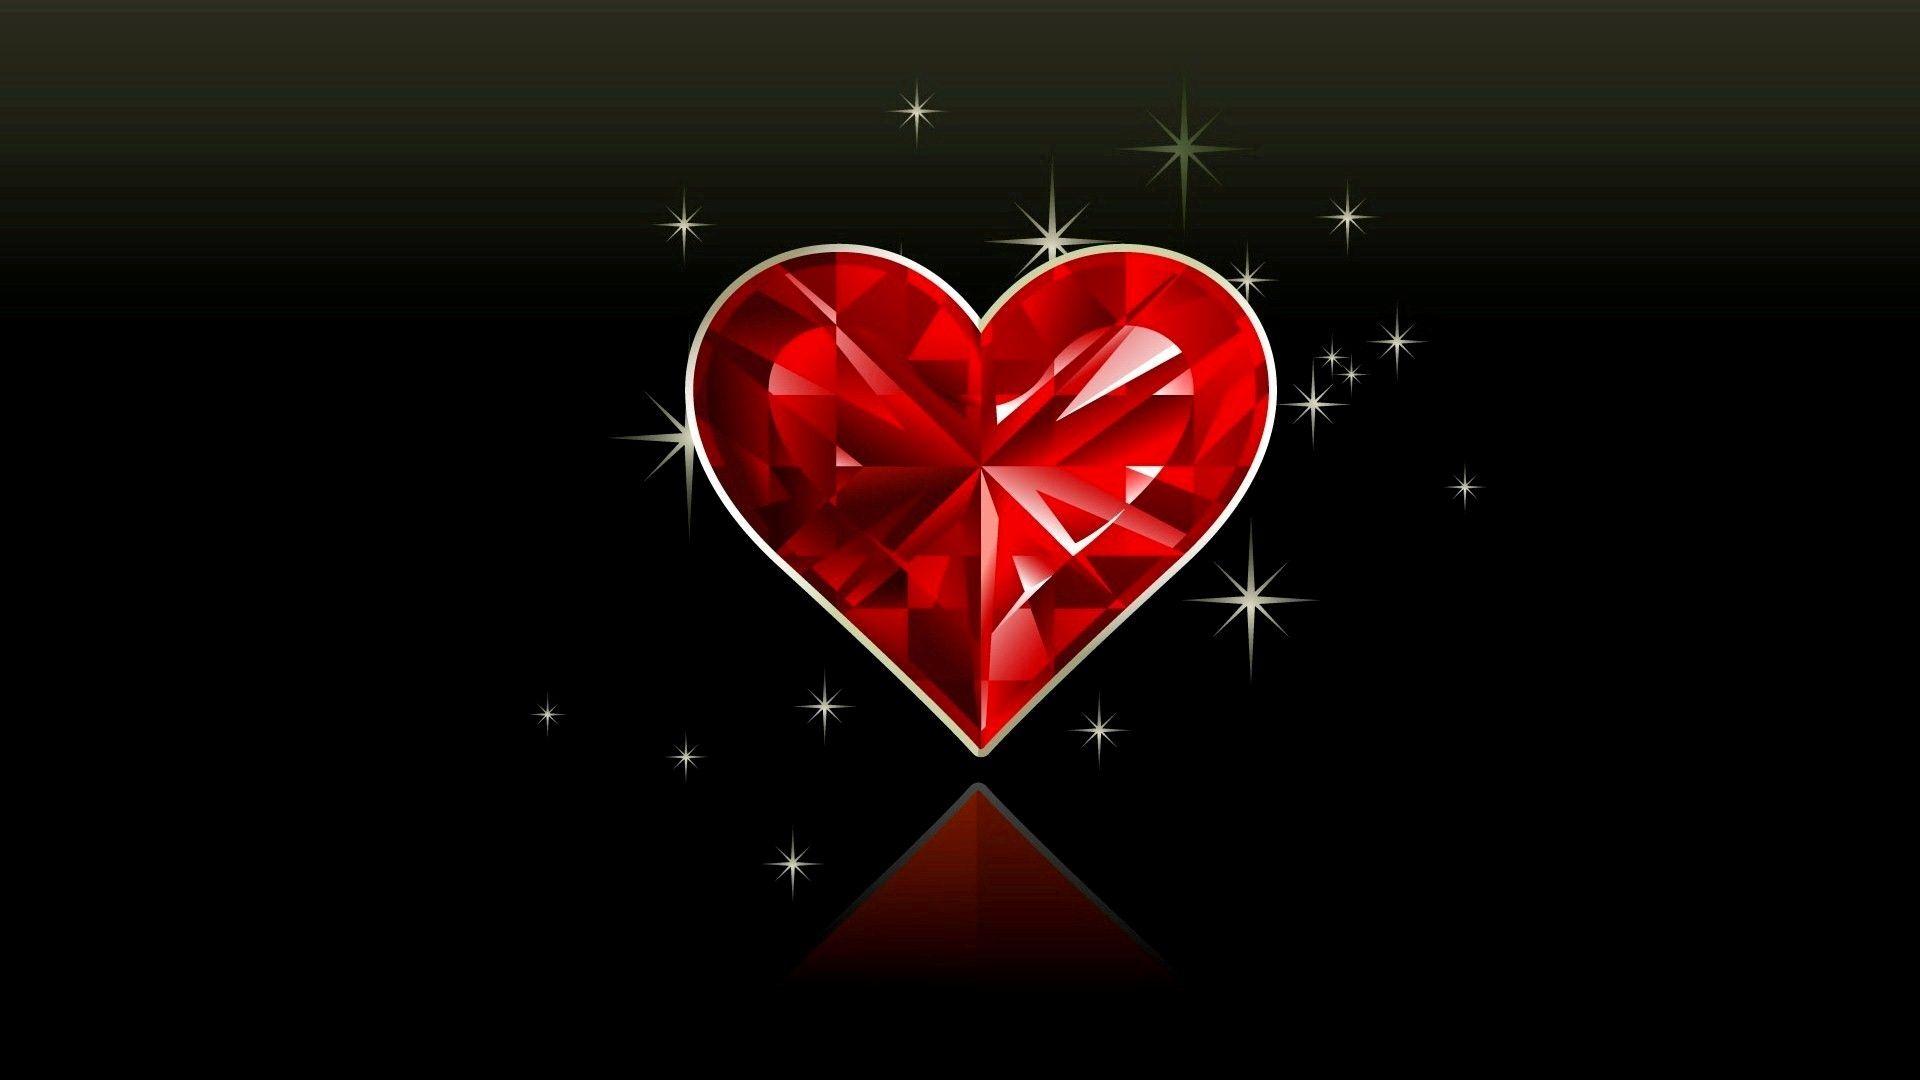 ♥• Red Crystal Heart in Black Background. !!!****Hearts Afire